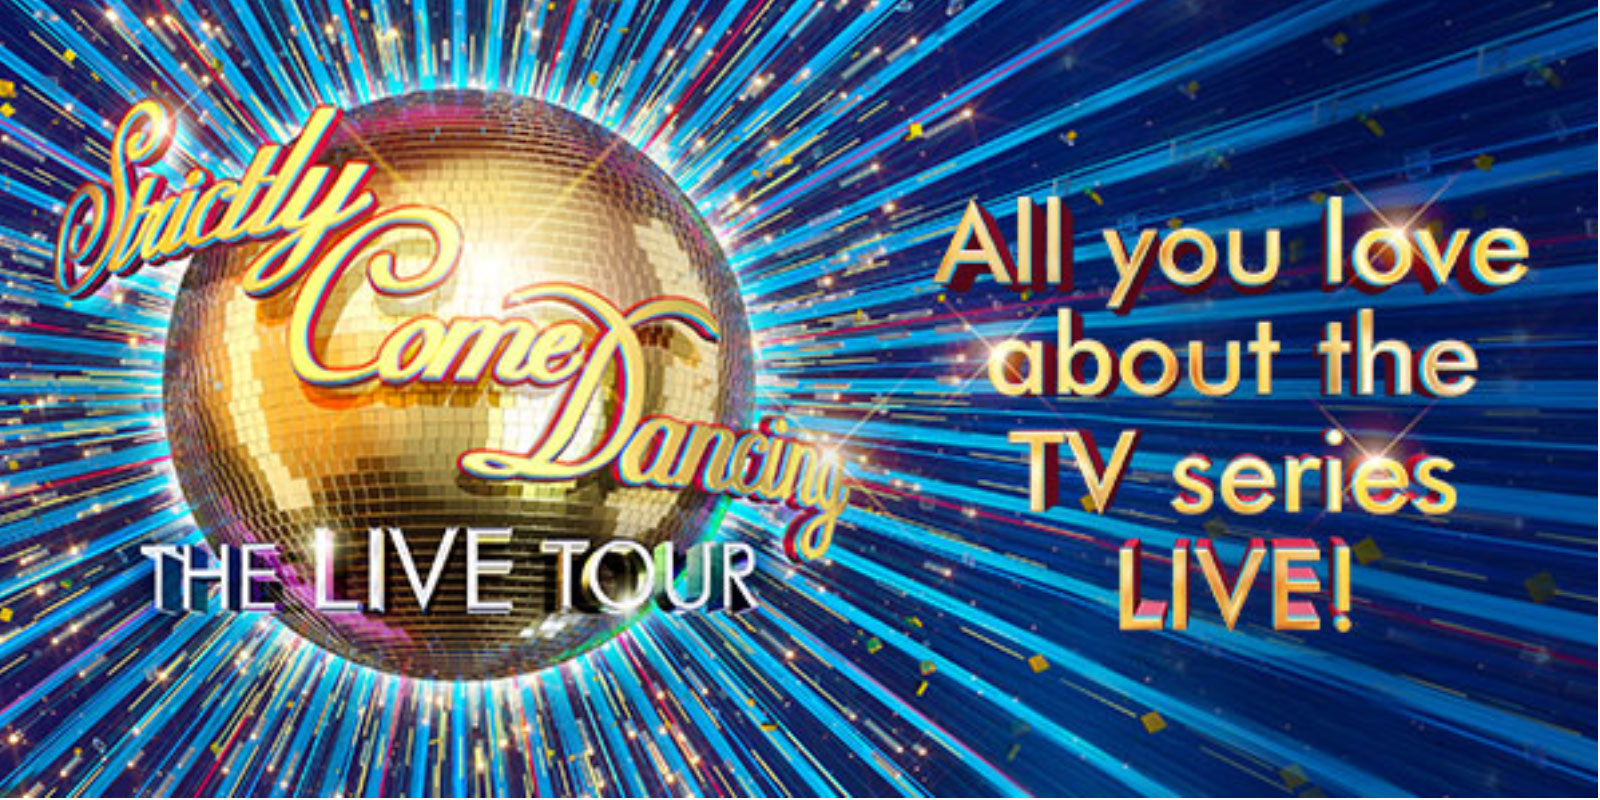 strictly come dancing live tour 2023 cardiff